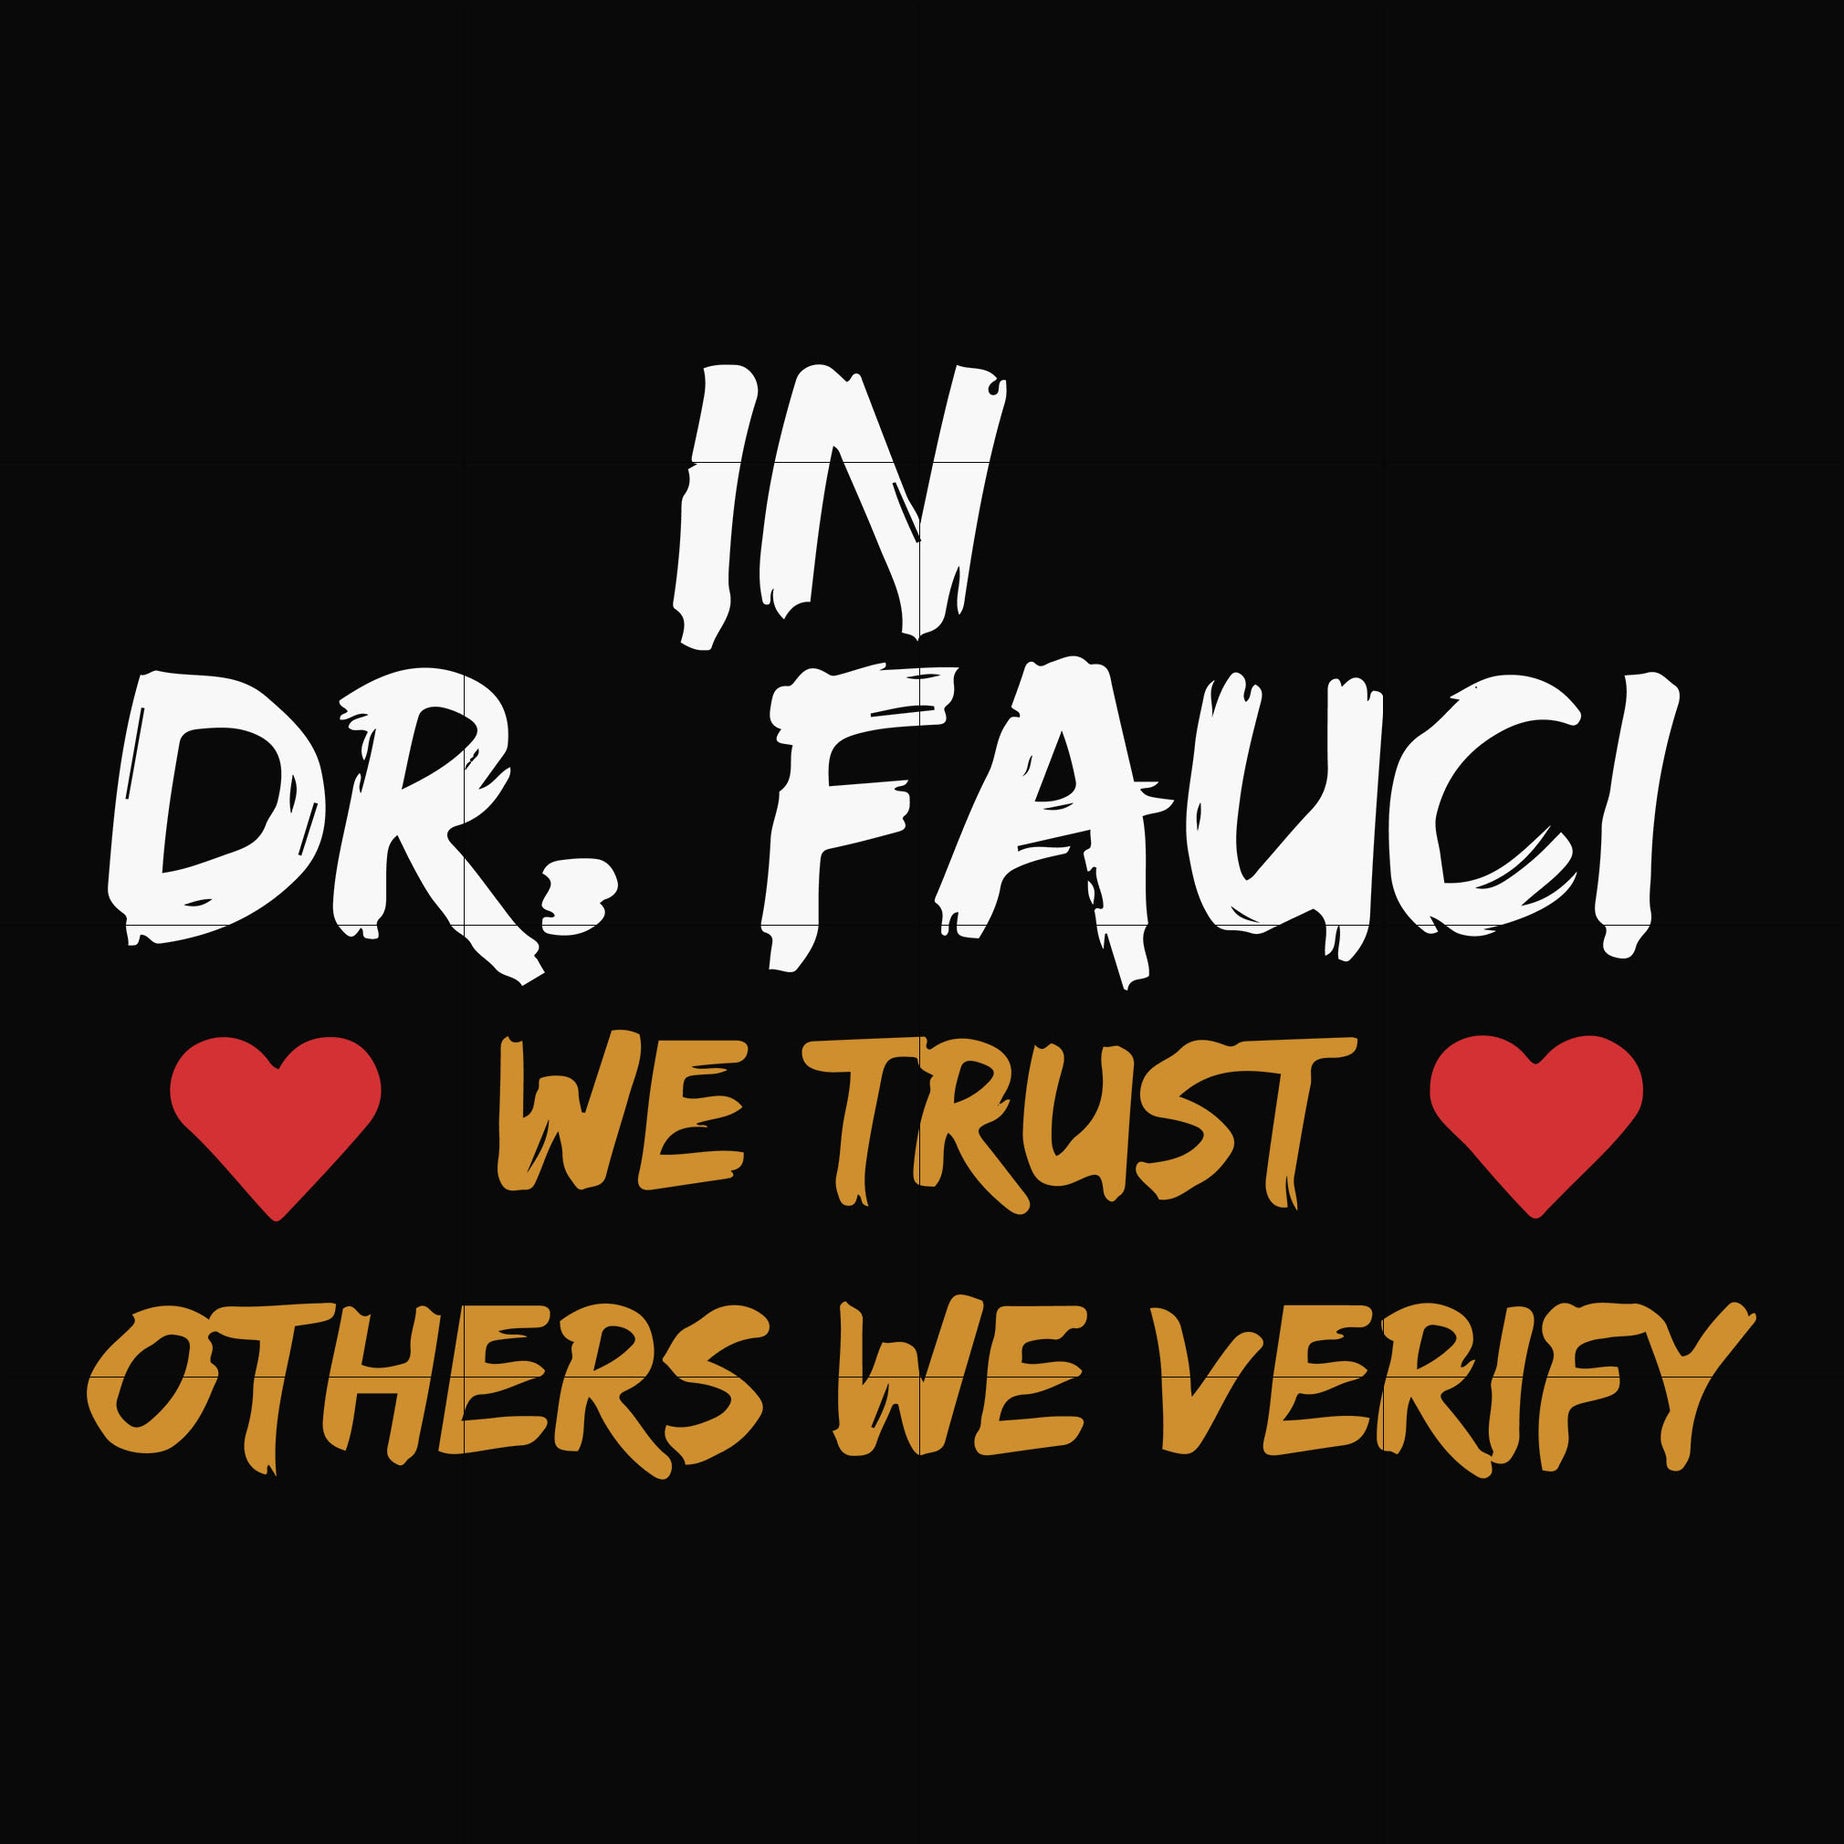 In Dr fauci we trust others we verify svg, png, dxf, eps digital file TD27072025